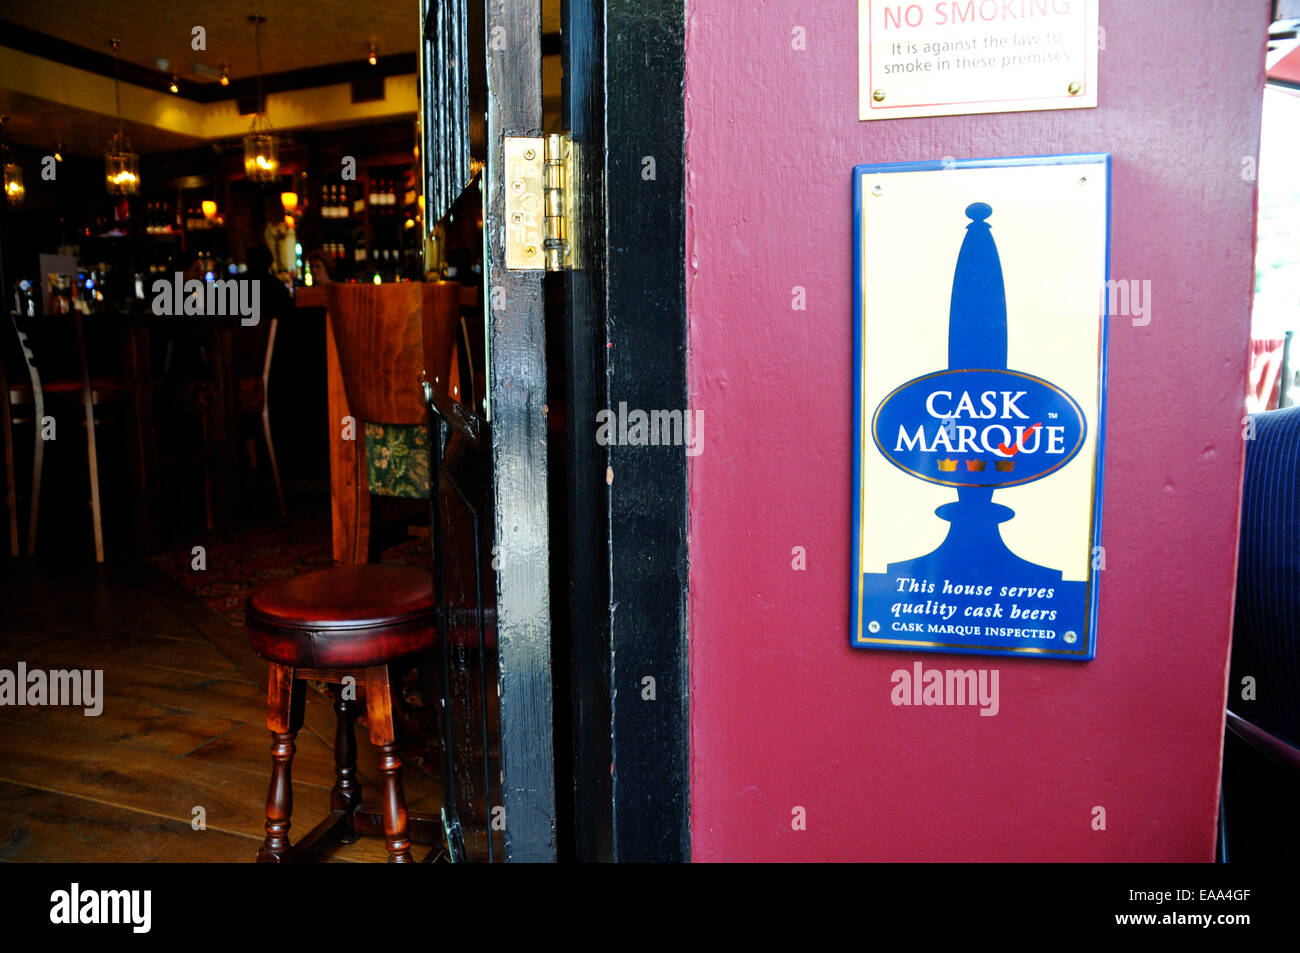 Entrance to a pub awarded the Cask Marque accreditation, London, England Stock Photo